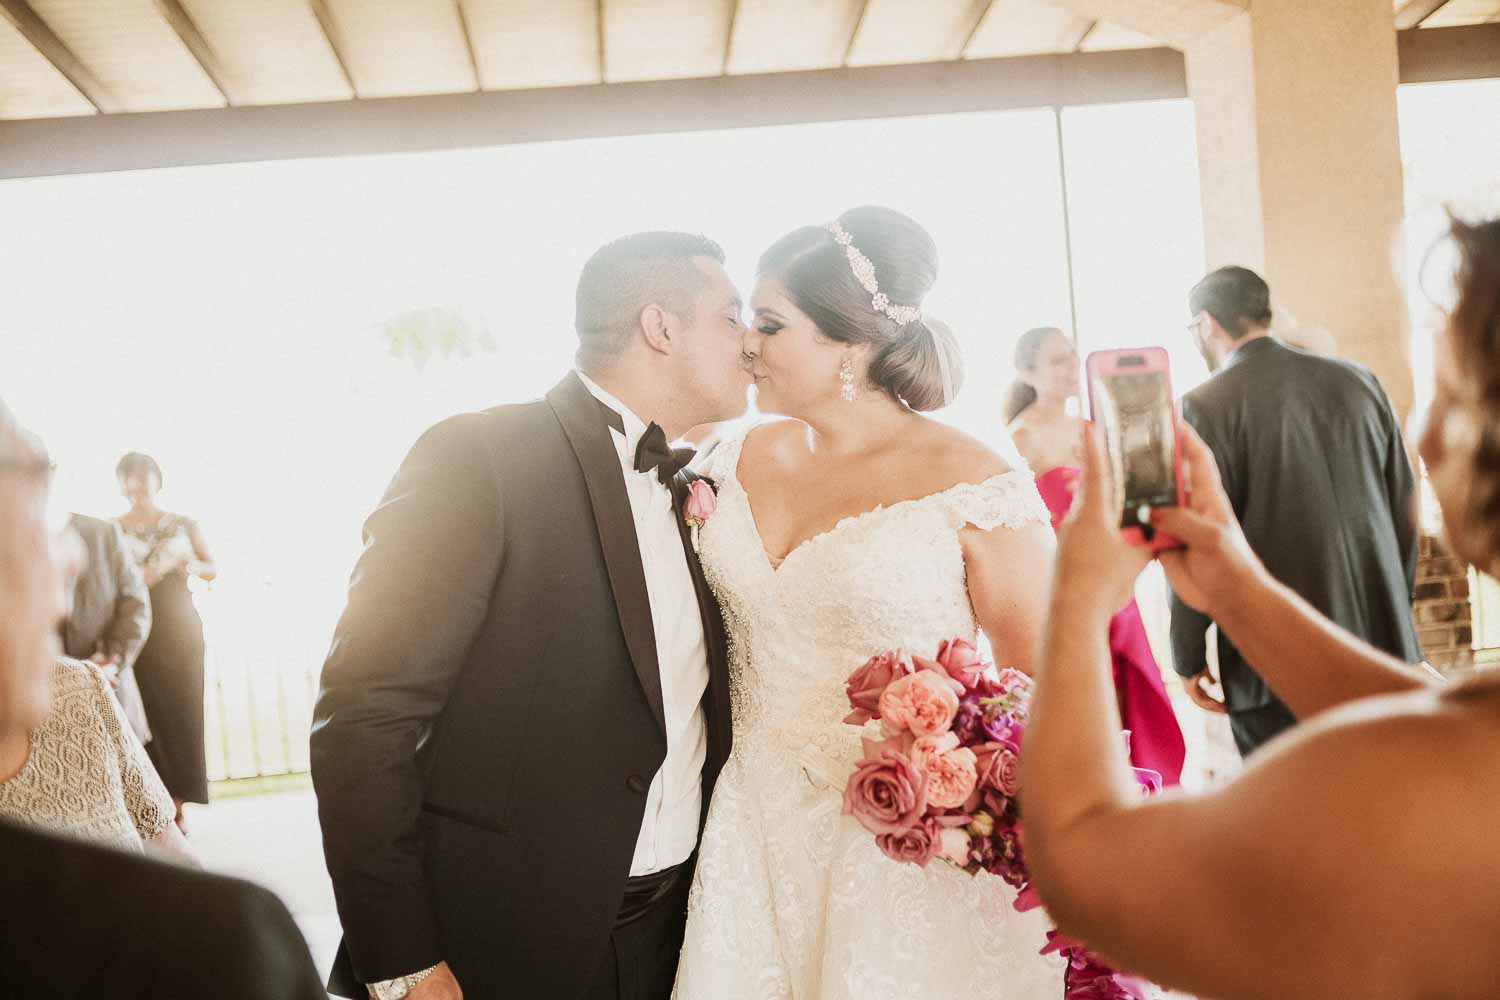 Alamo south Texas wedding - Philip Thomas PhotographyClarissa and Eric tied the knot in Mission south Texas, at the family owned event center, Villa del Palmar in Mission, and the wedding reception at Palazzio Event Center.